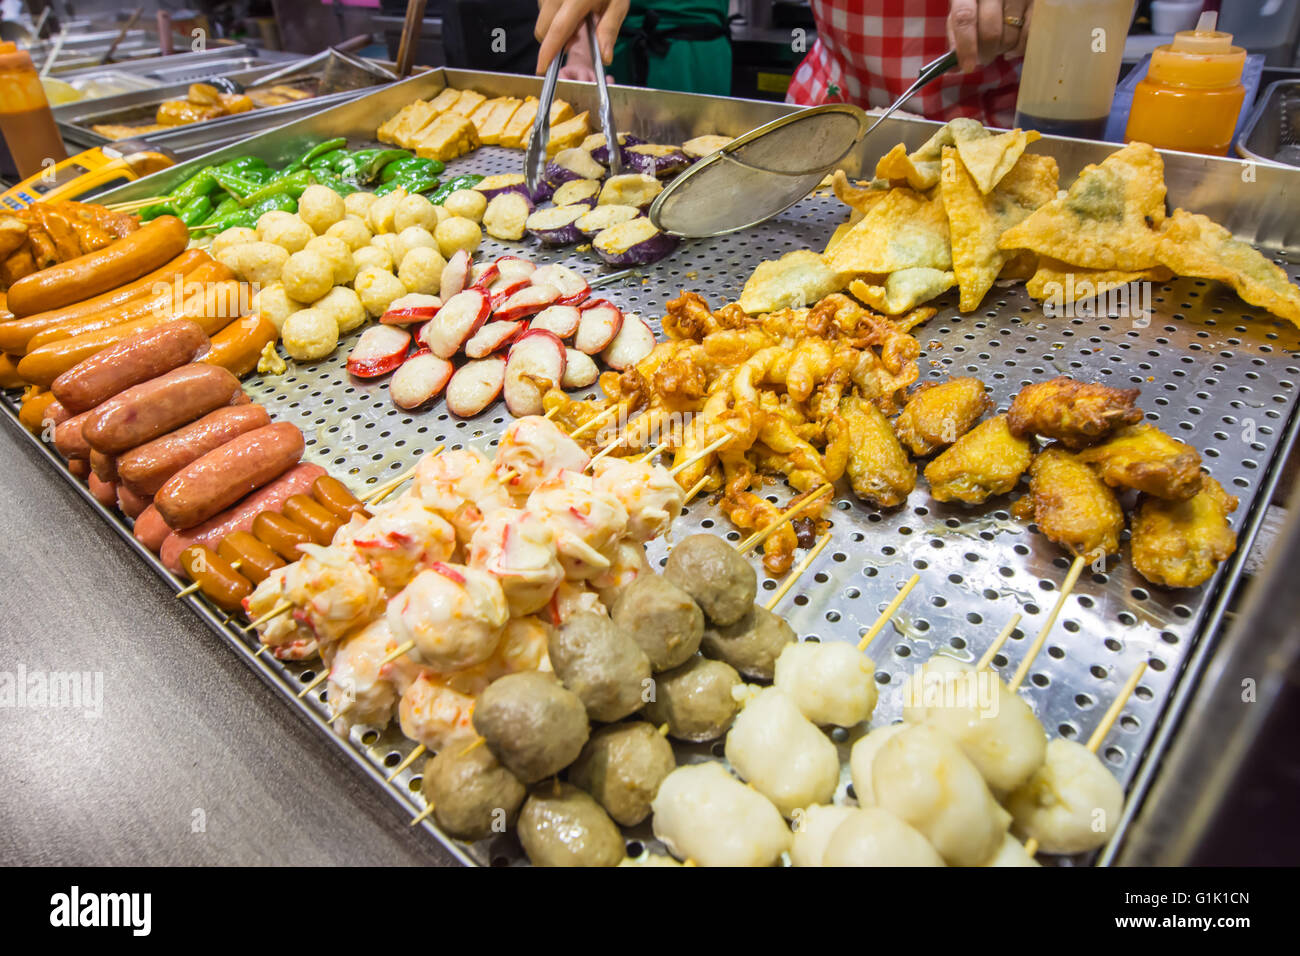 Mixed cooked Asian food at food stall Stock Photo